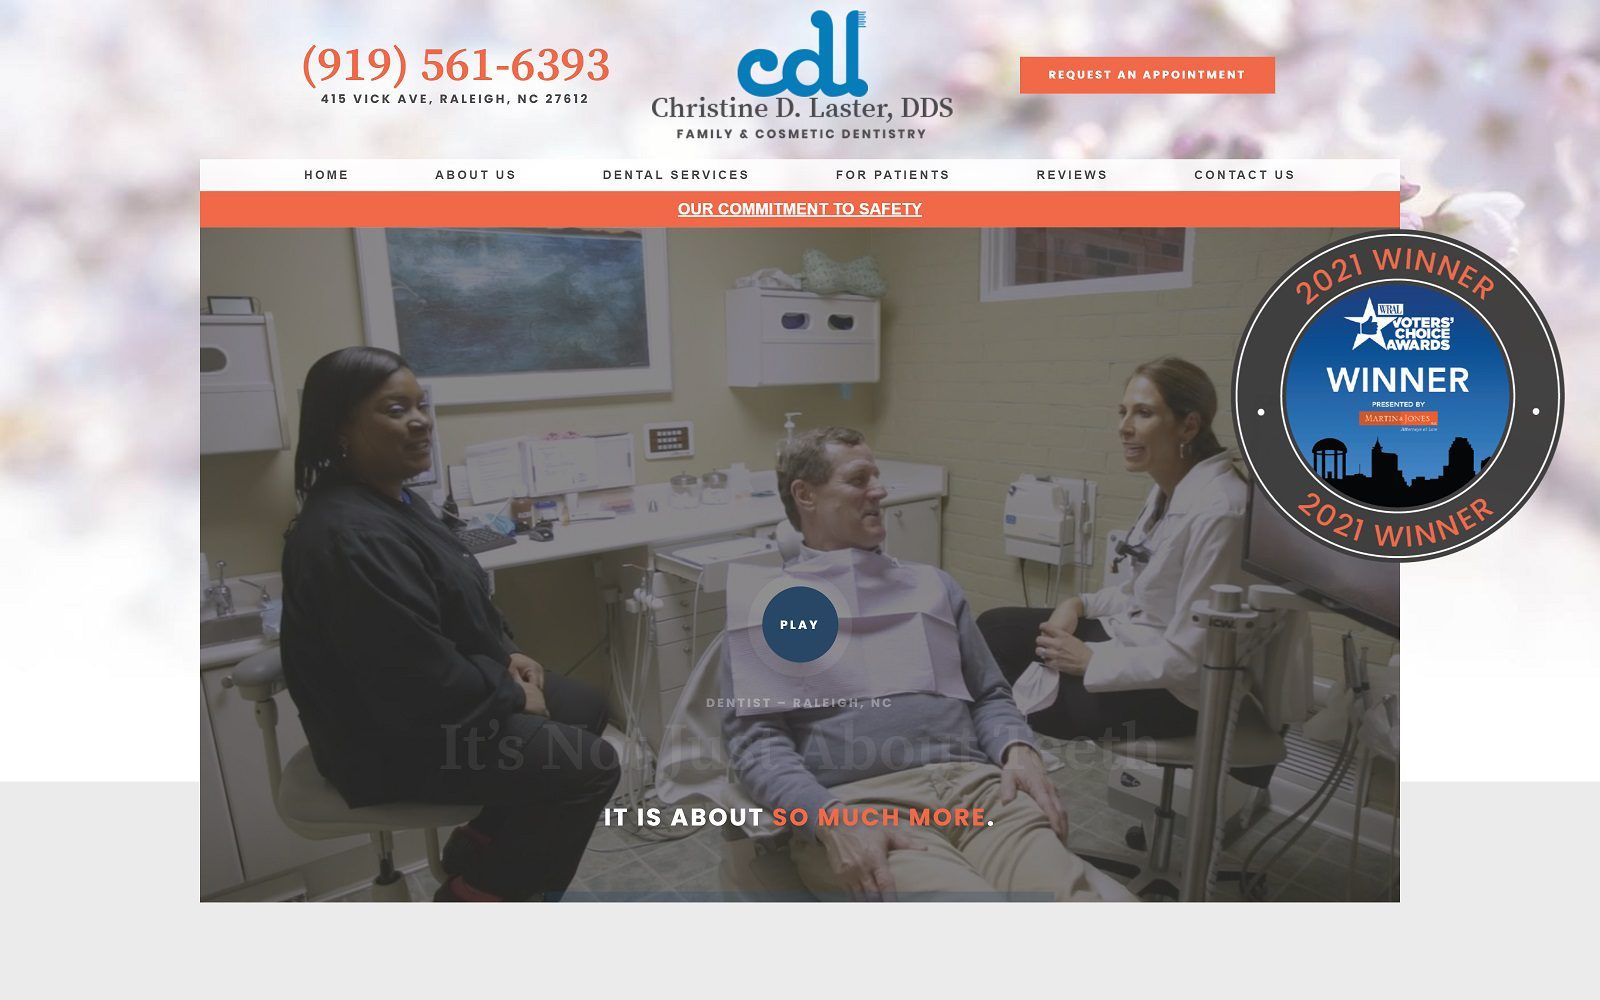 The Screenshot of Christine D. Laster DDS Family and Cosmetic Dentistry Website